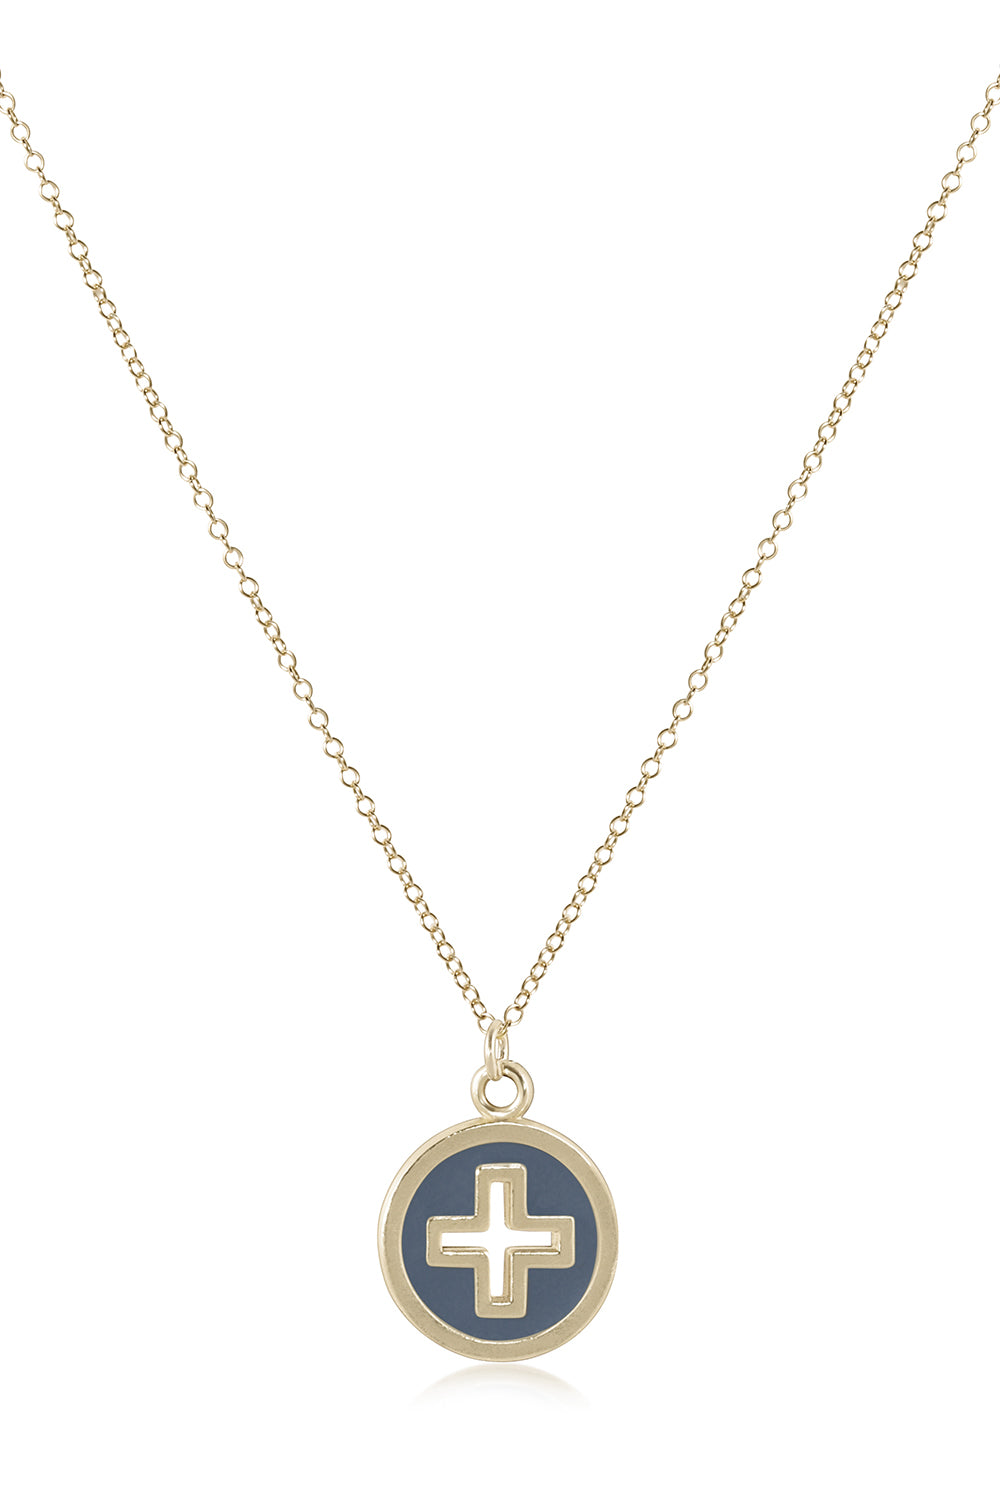 EN Classic Necklace with Signature Cross Disc - Grey